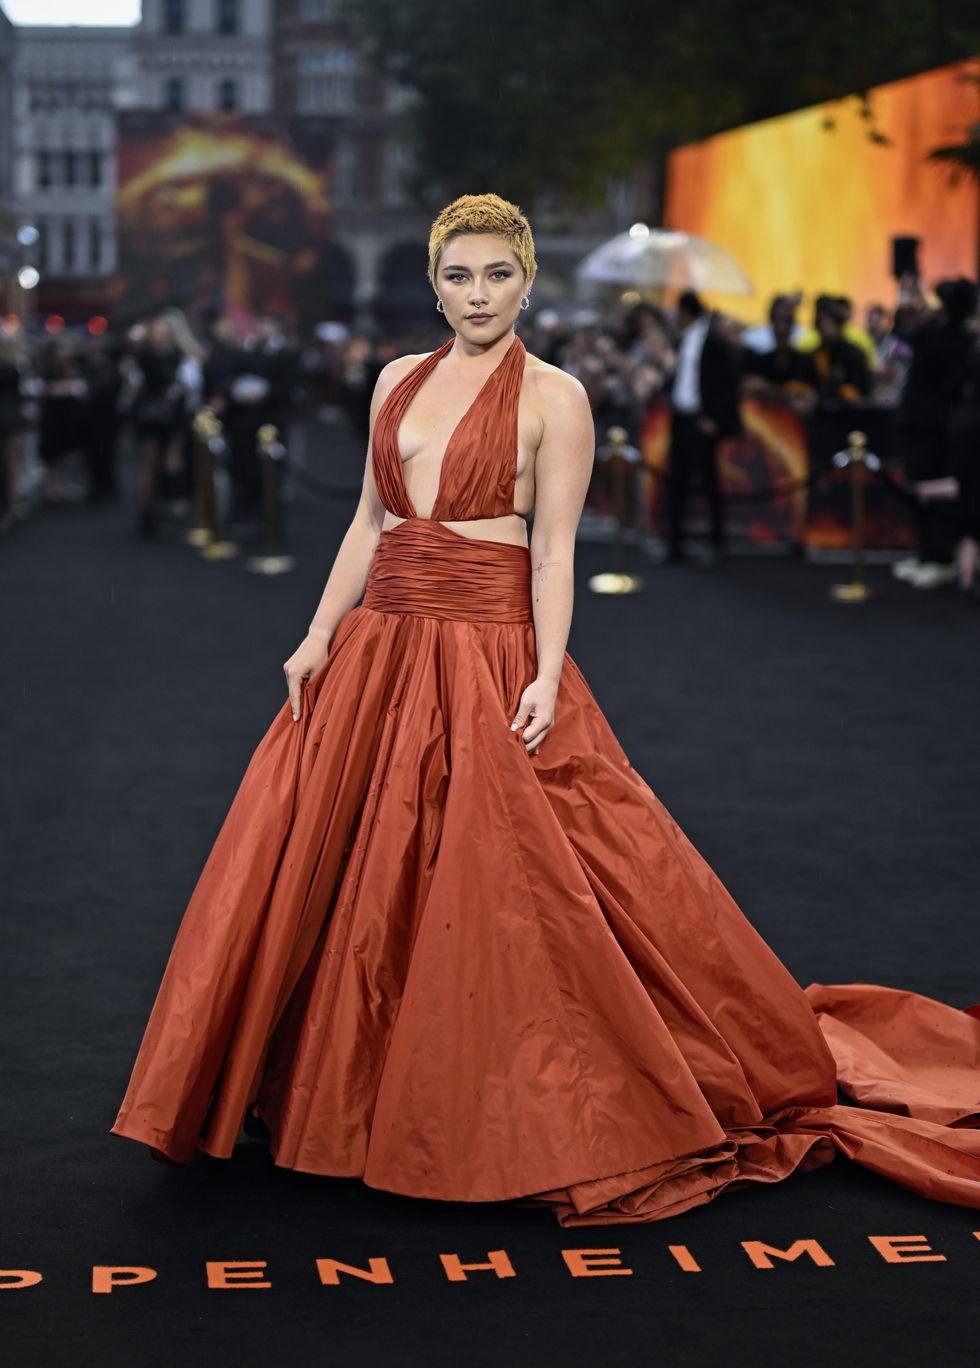 Florence Pugh, Jennifer Lawrence and More Stars Attend Haute